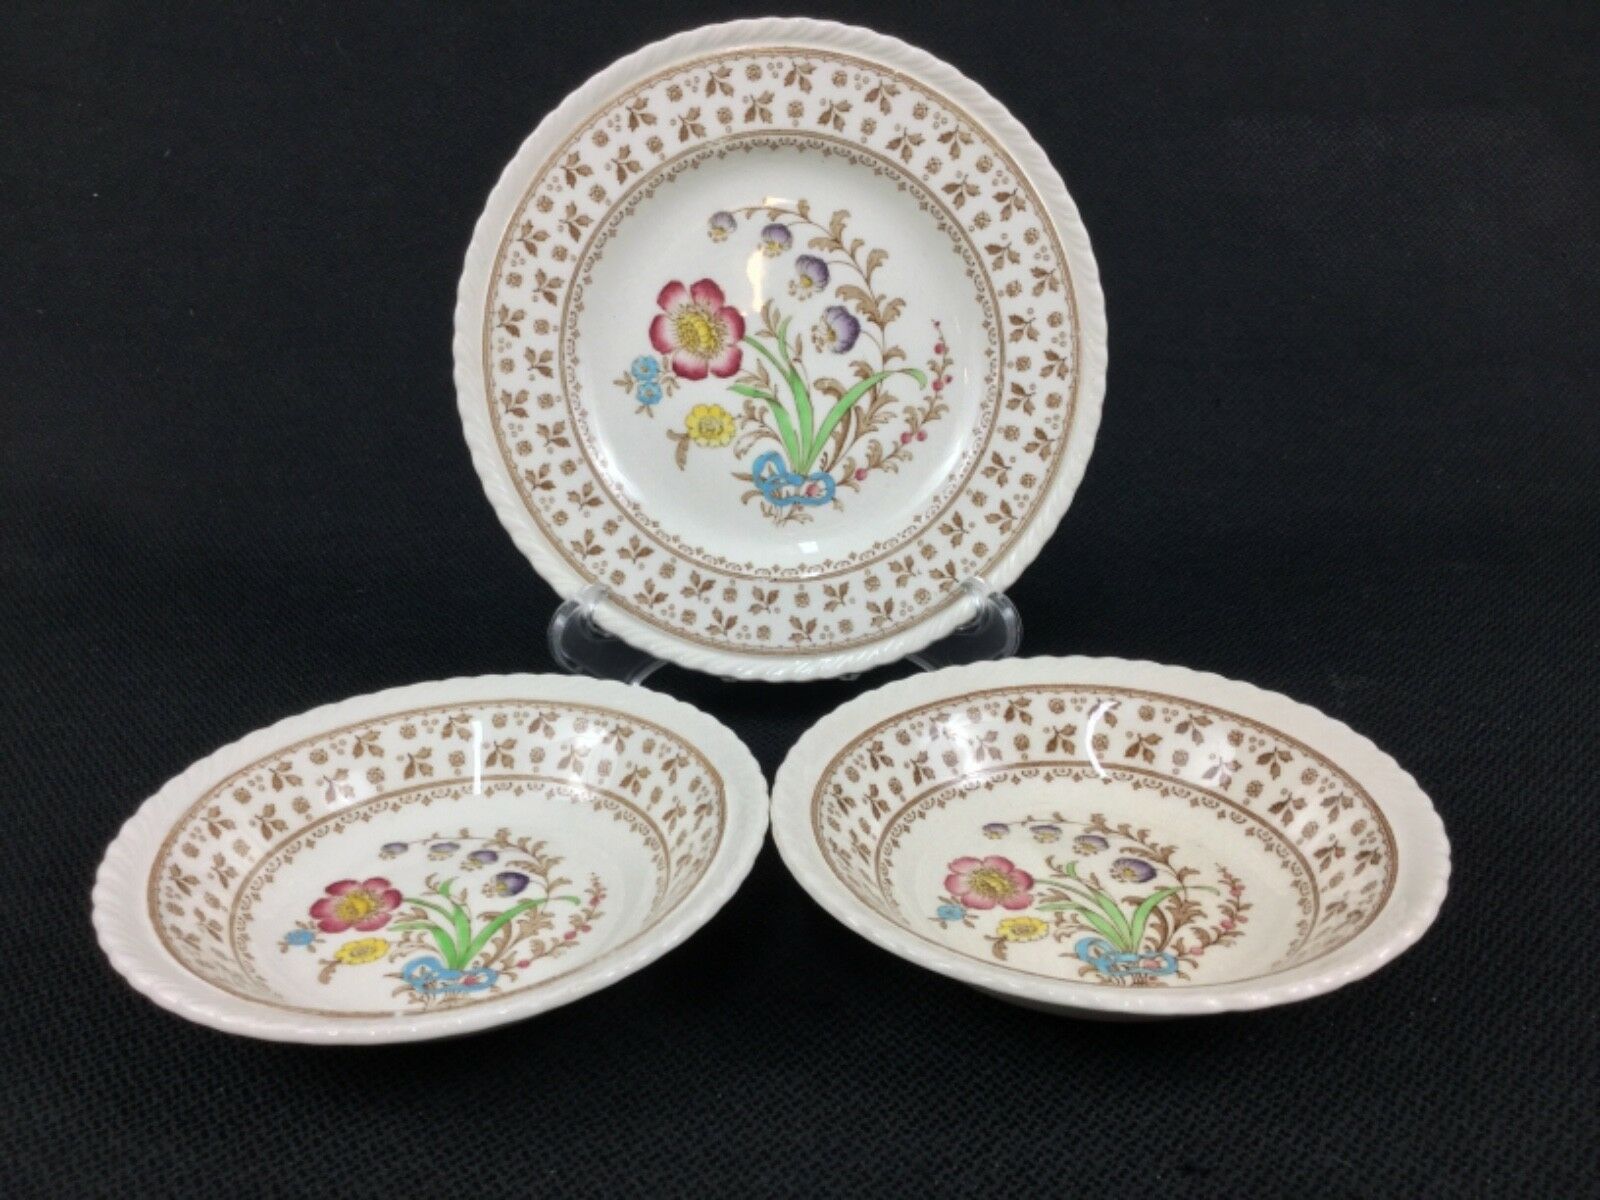 Crown Ducal Knutsford One 6 1/4" Bread Plate, 2 Fruit Bowls Brown Transferware